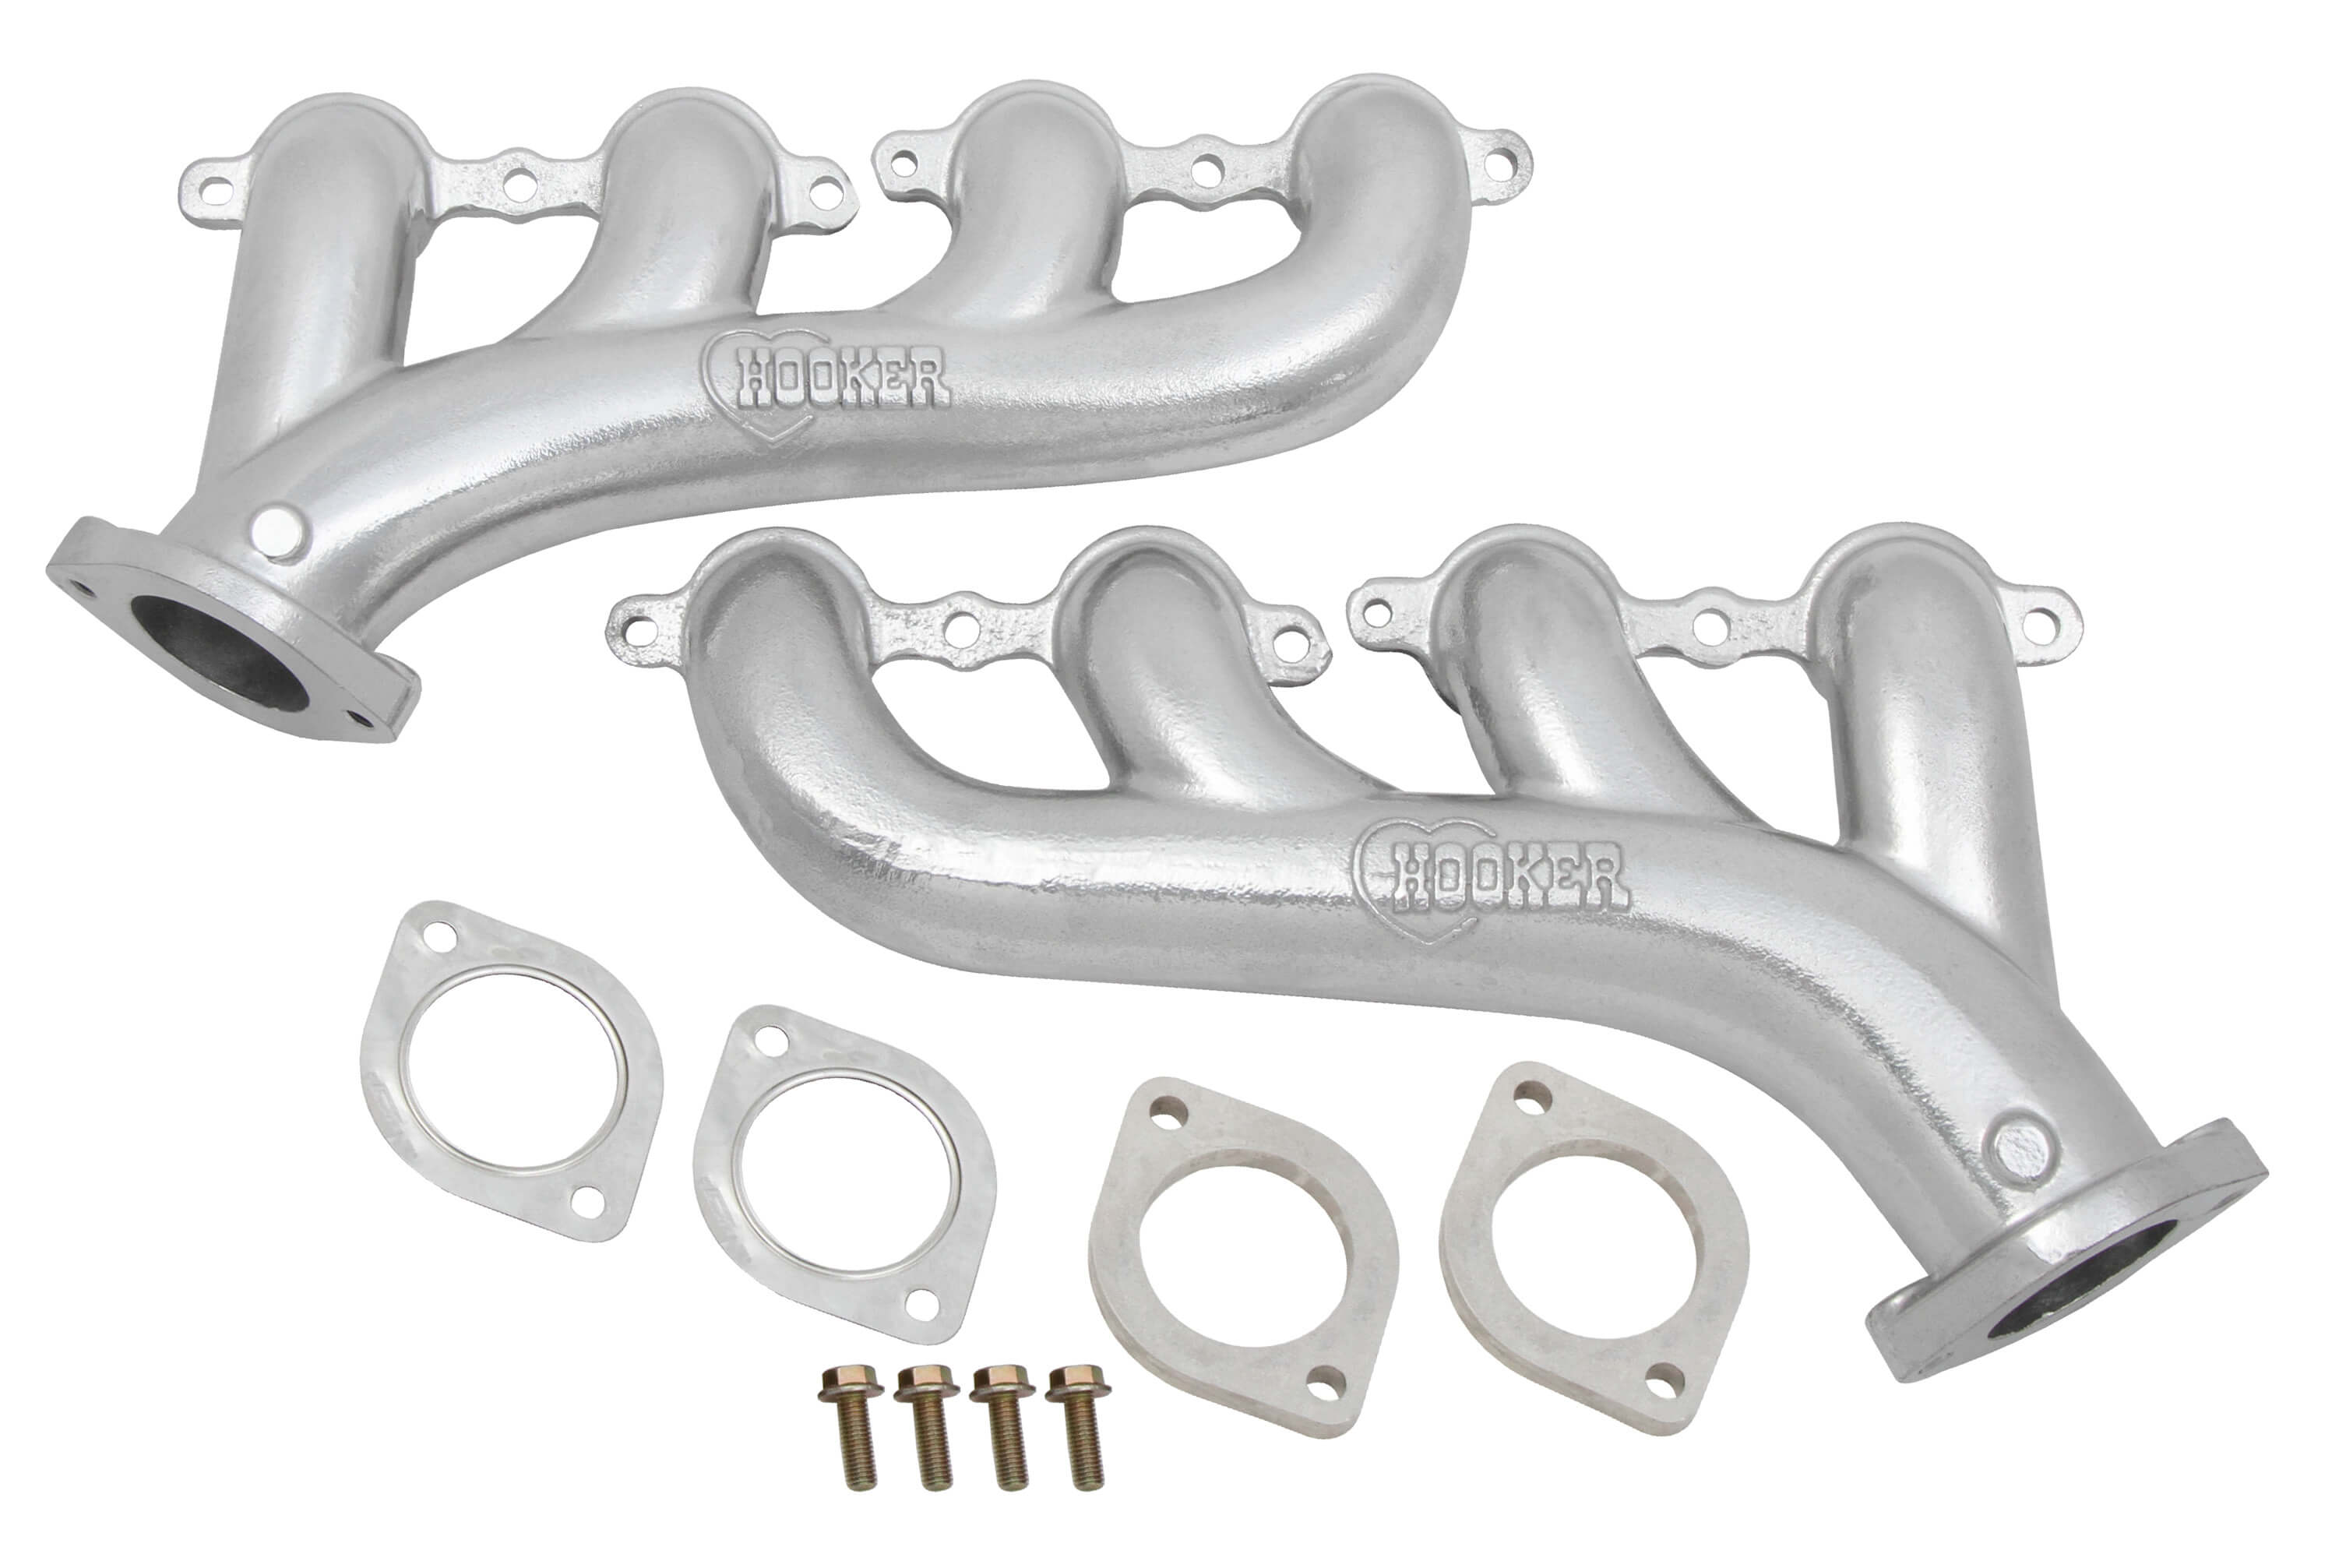 GM LS Series Hooker Headers Exhaust Manifolds w/2.5" Outlet - Silver Ceramic Finish